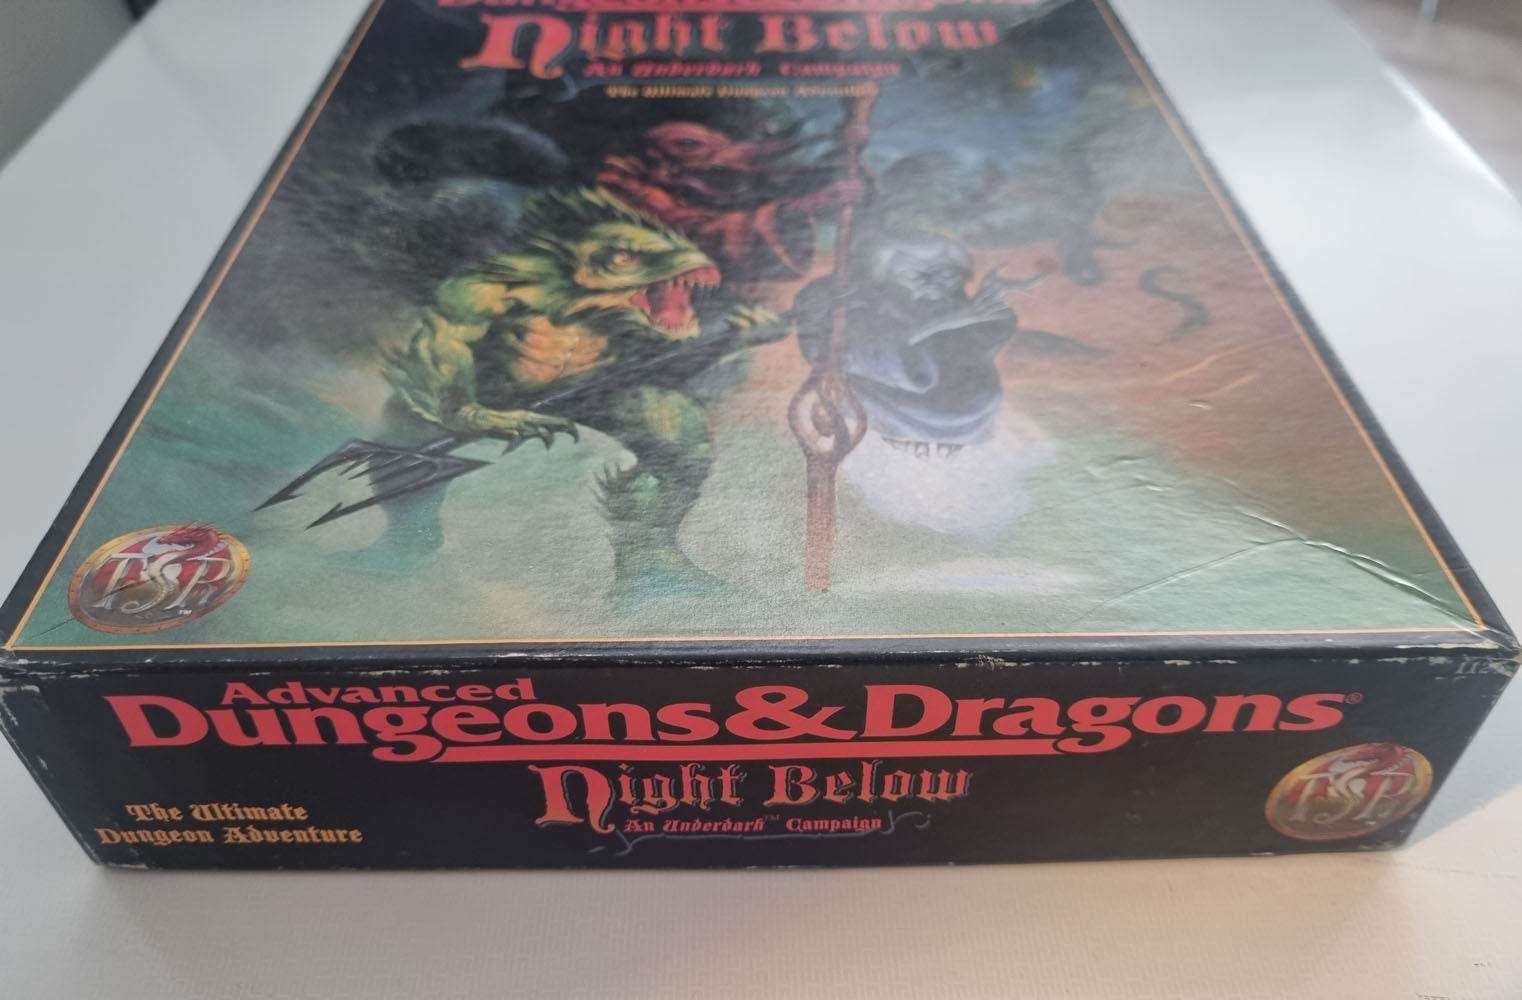 Advanced Dungeons and Dragons: Night Below - An Underdark Campaign